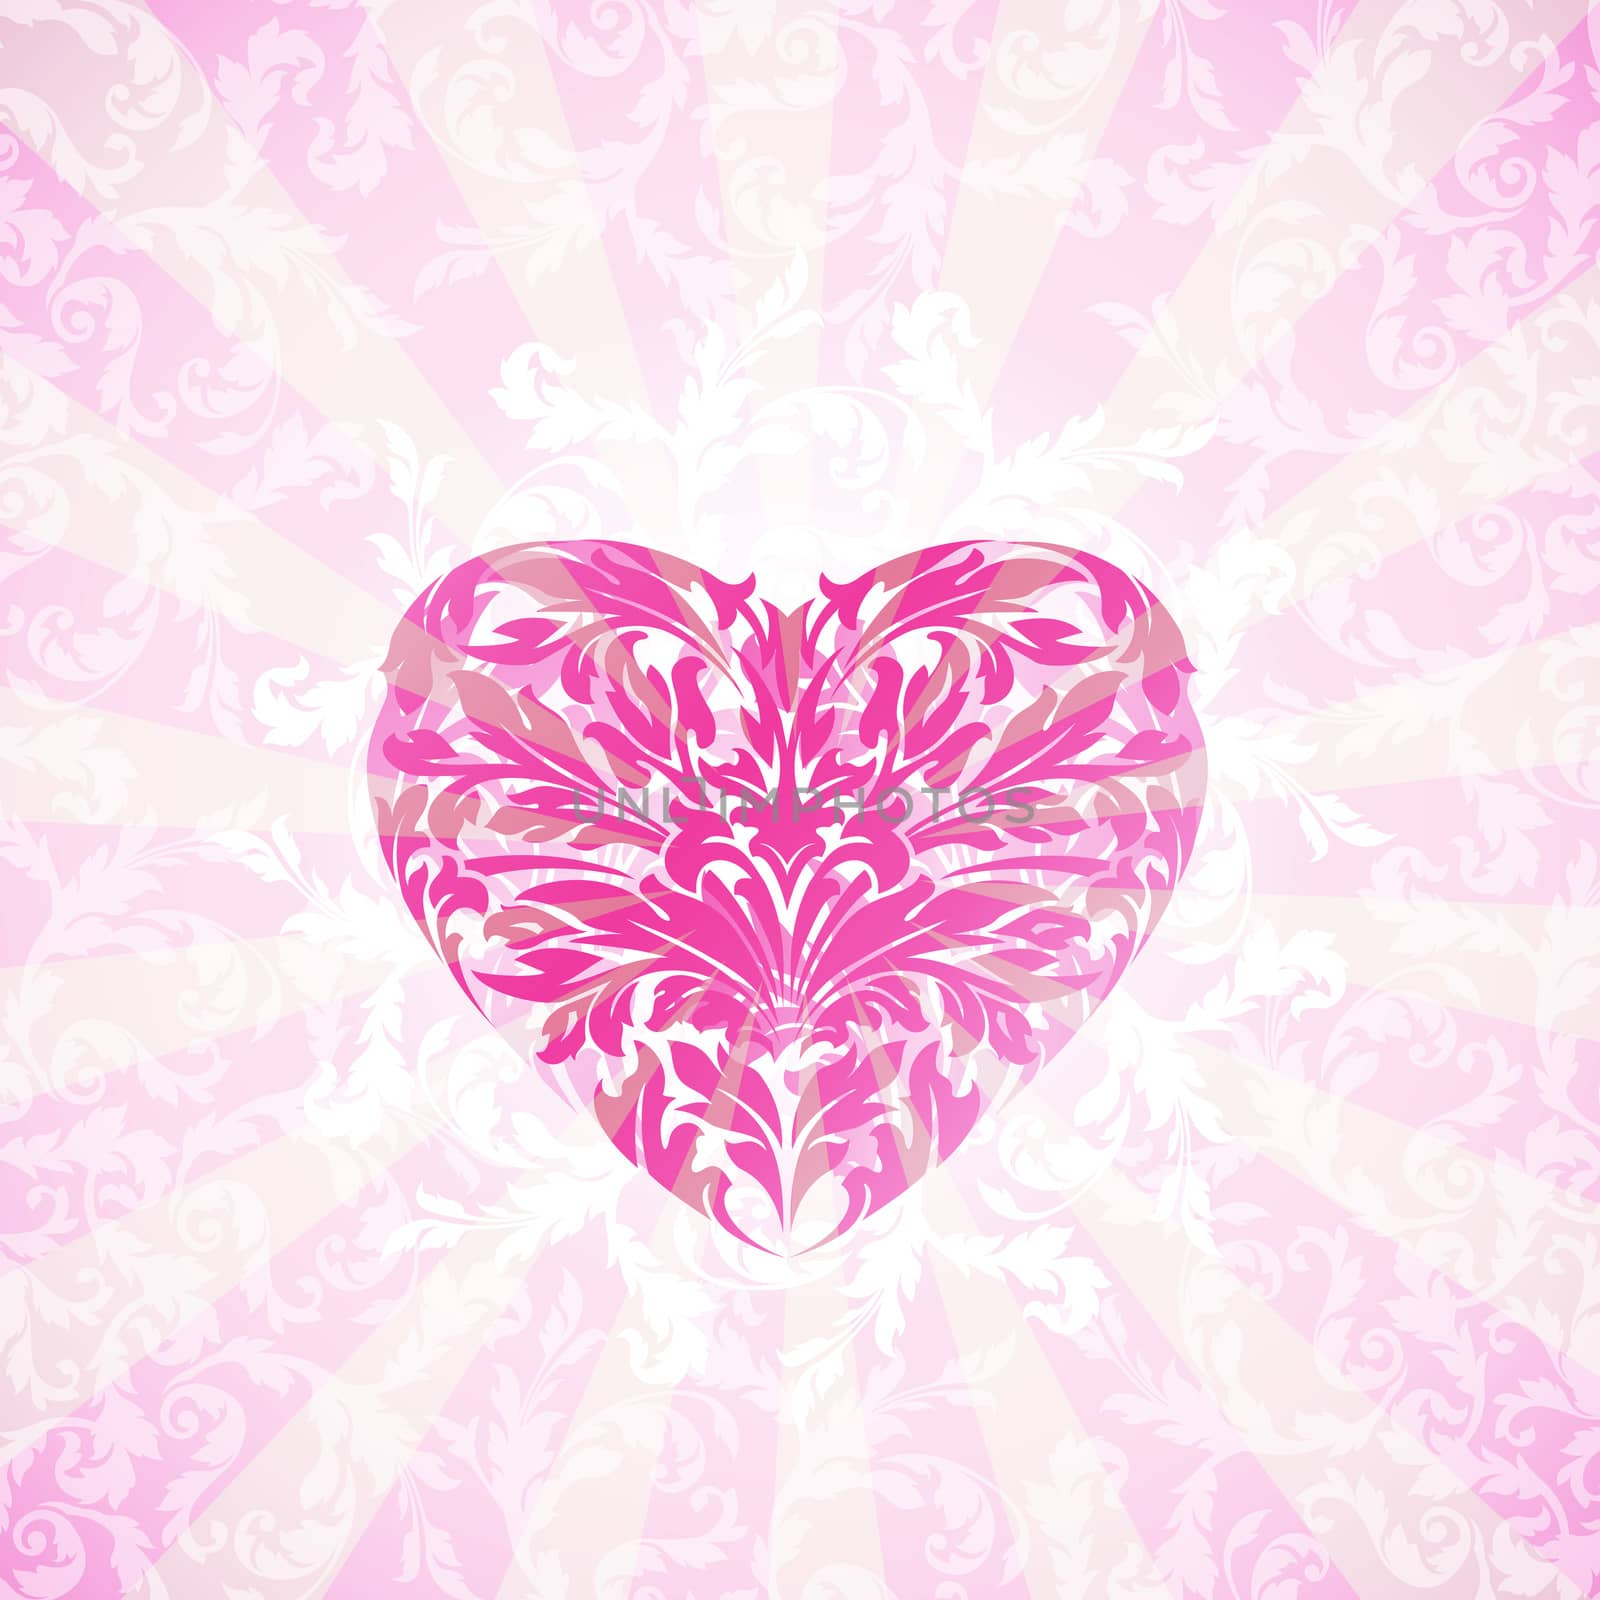 Happy Valentine's Day Floral Background with Heart